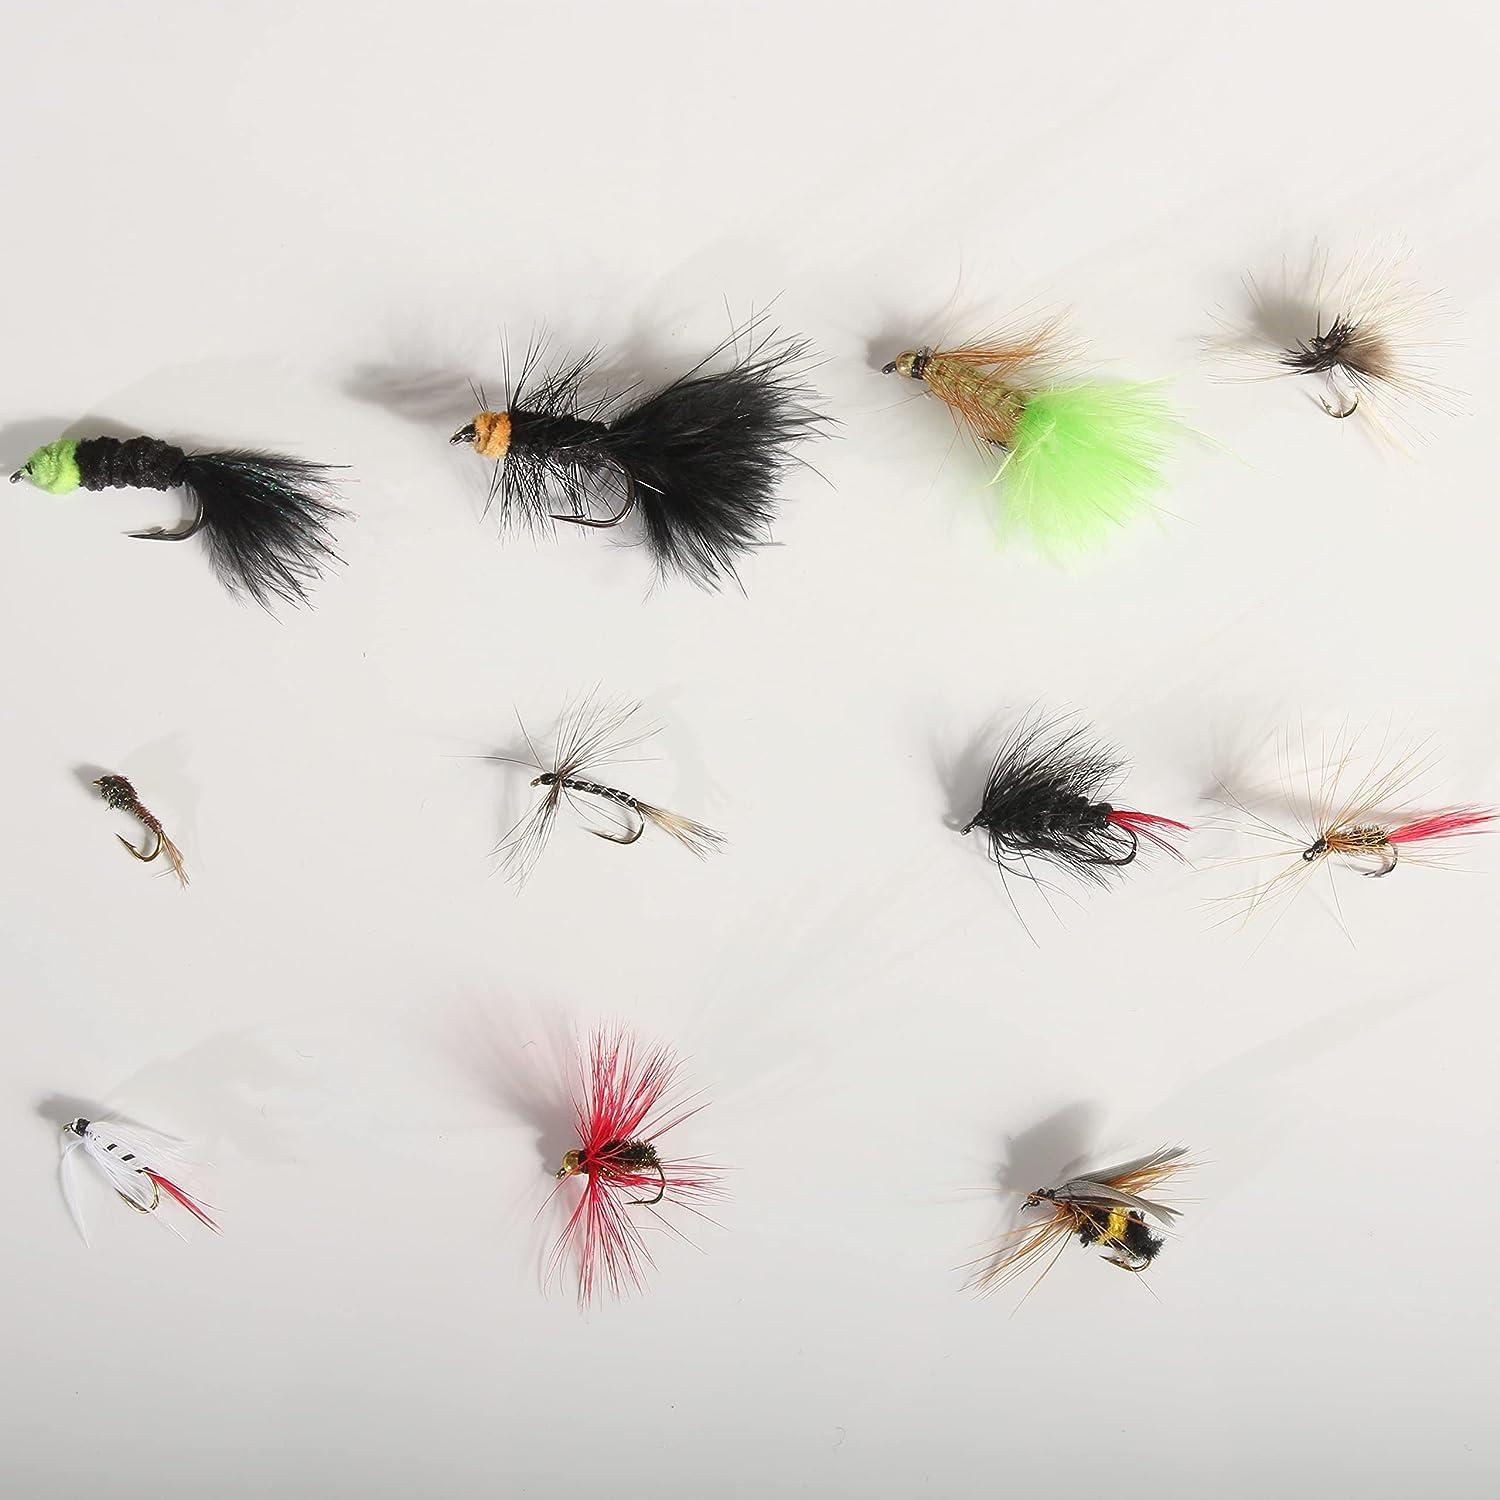  Feeder Creek Dry Fly Fishing Lures Assortment, 60 Flies for  Fly Fishing Bass, Salmon & Other Freshwater Fish, 10 Patterns (2 of Each),  Size 14,16,18 with 2 Boxes